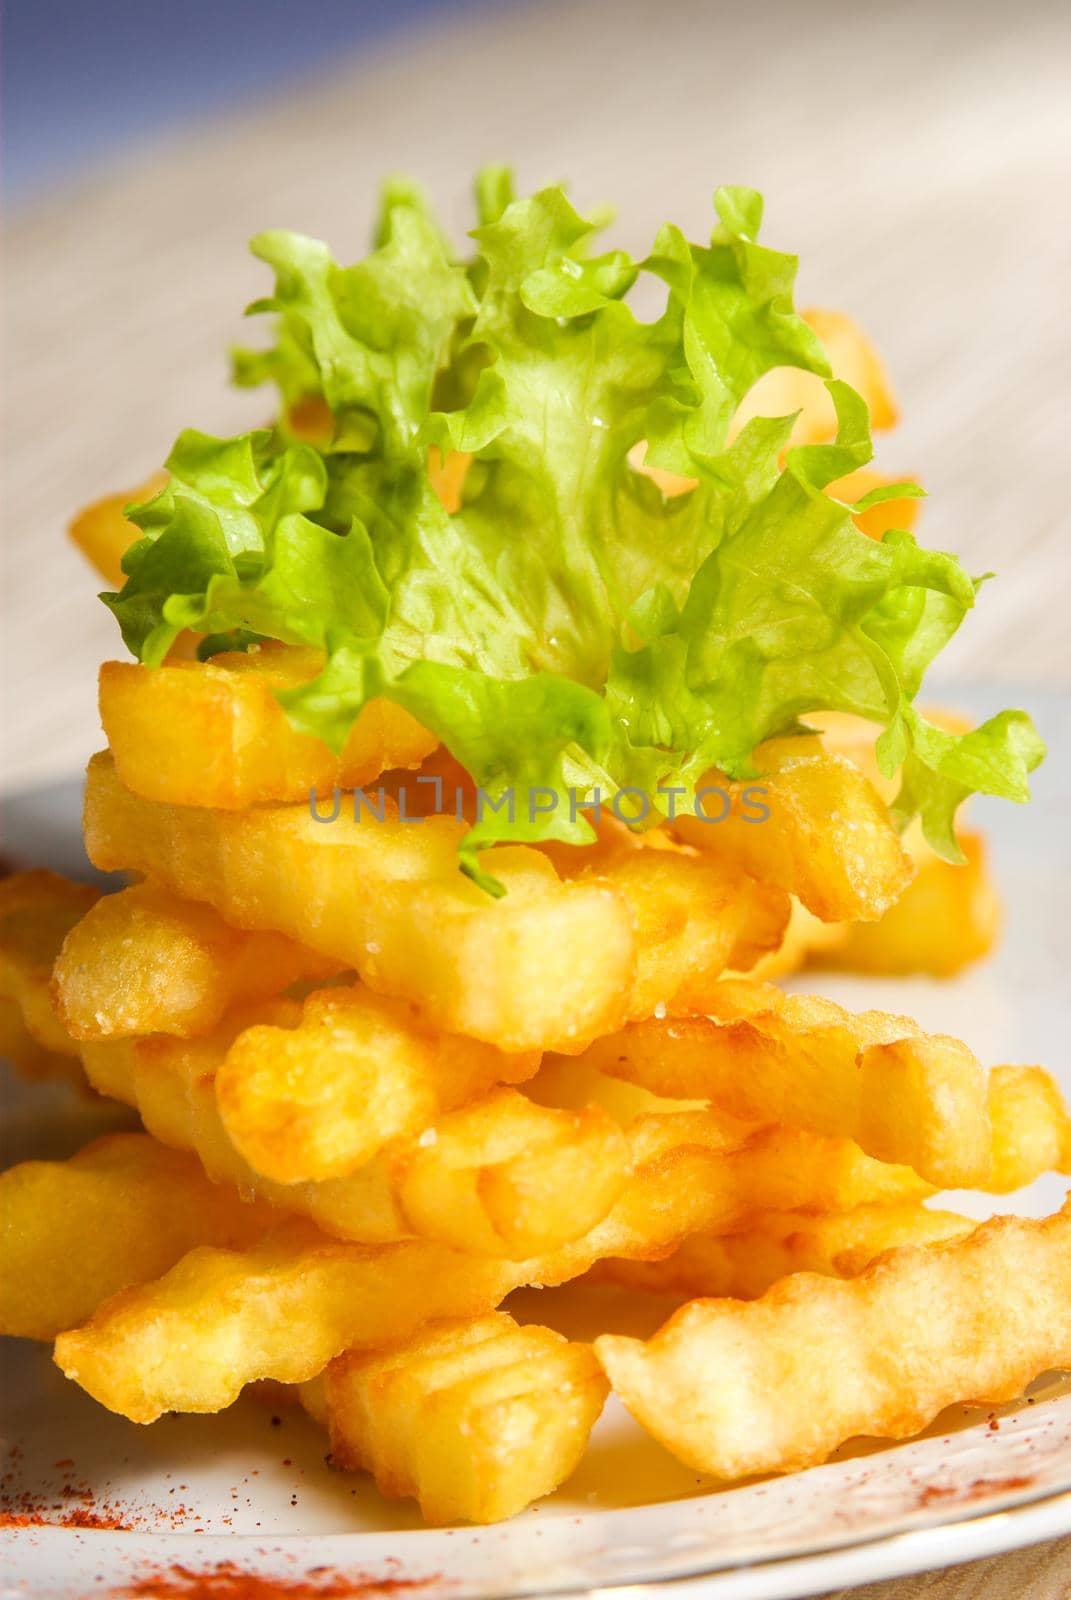 Fresh fried wavy french fries tower